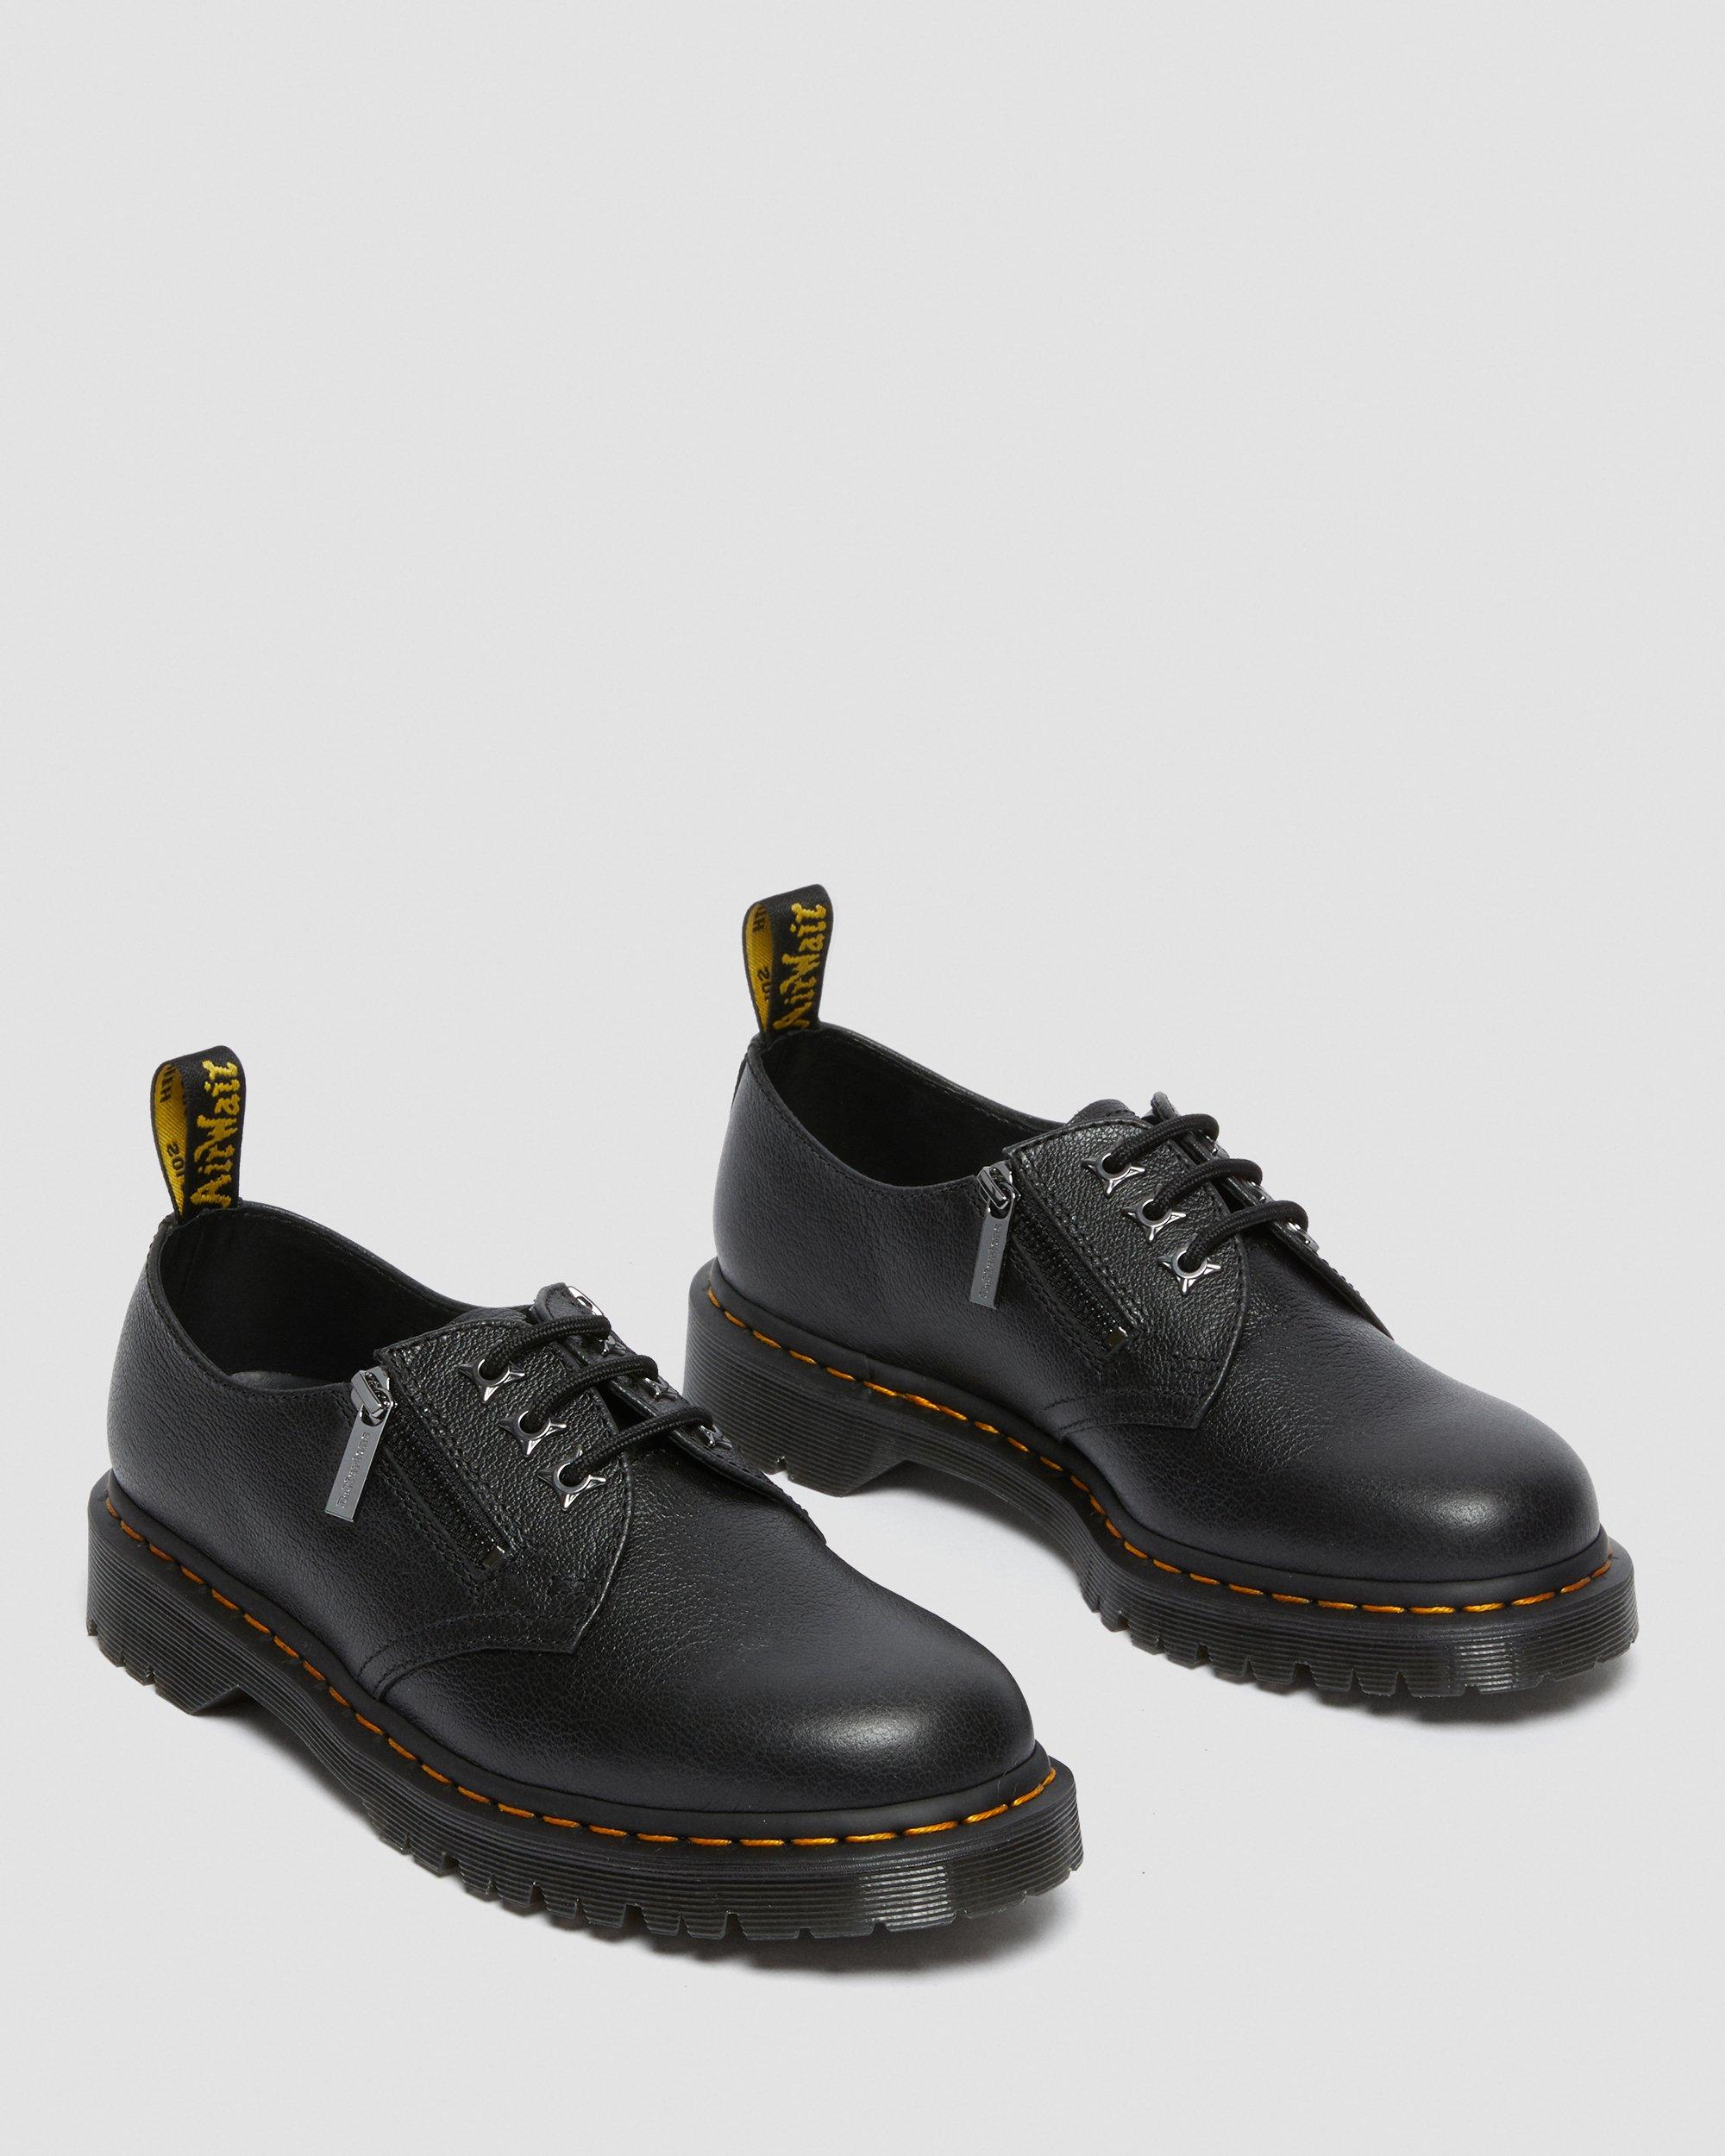 DR MARTENS 1461 Zip Tumbled Leather Oxford Shoes